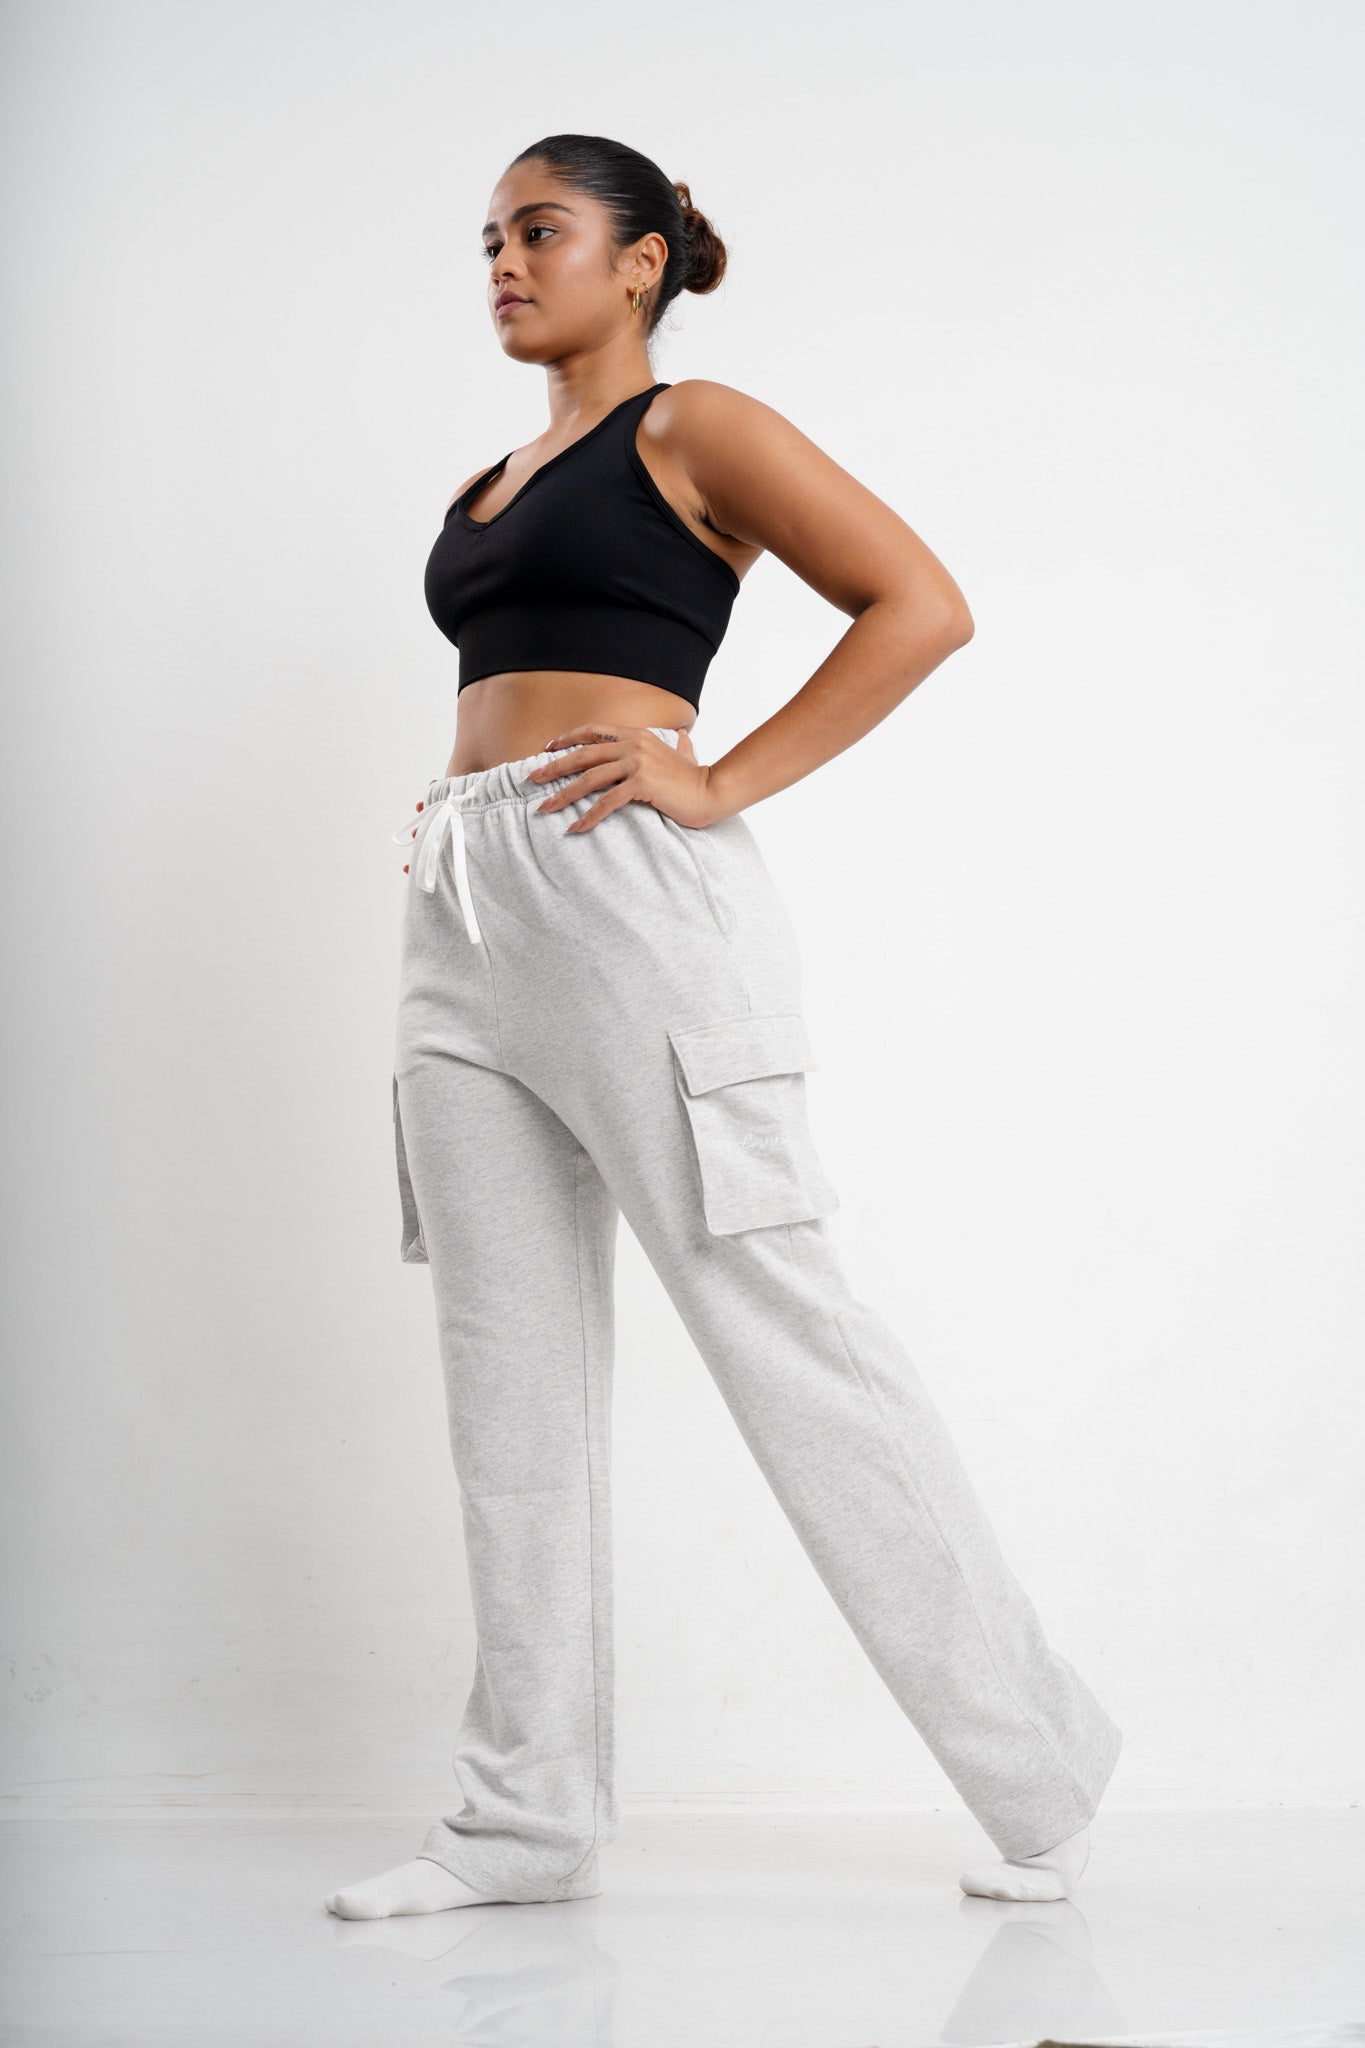 Women's Joggers and Pants – Carnage